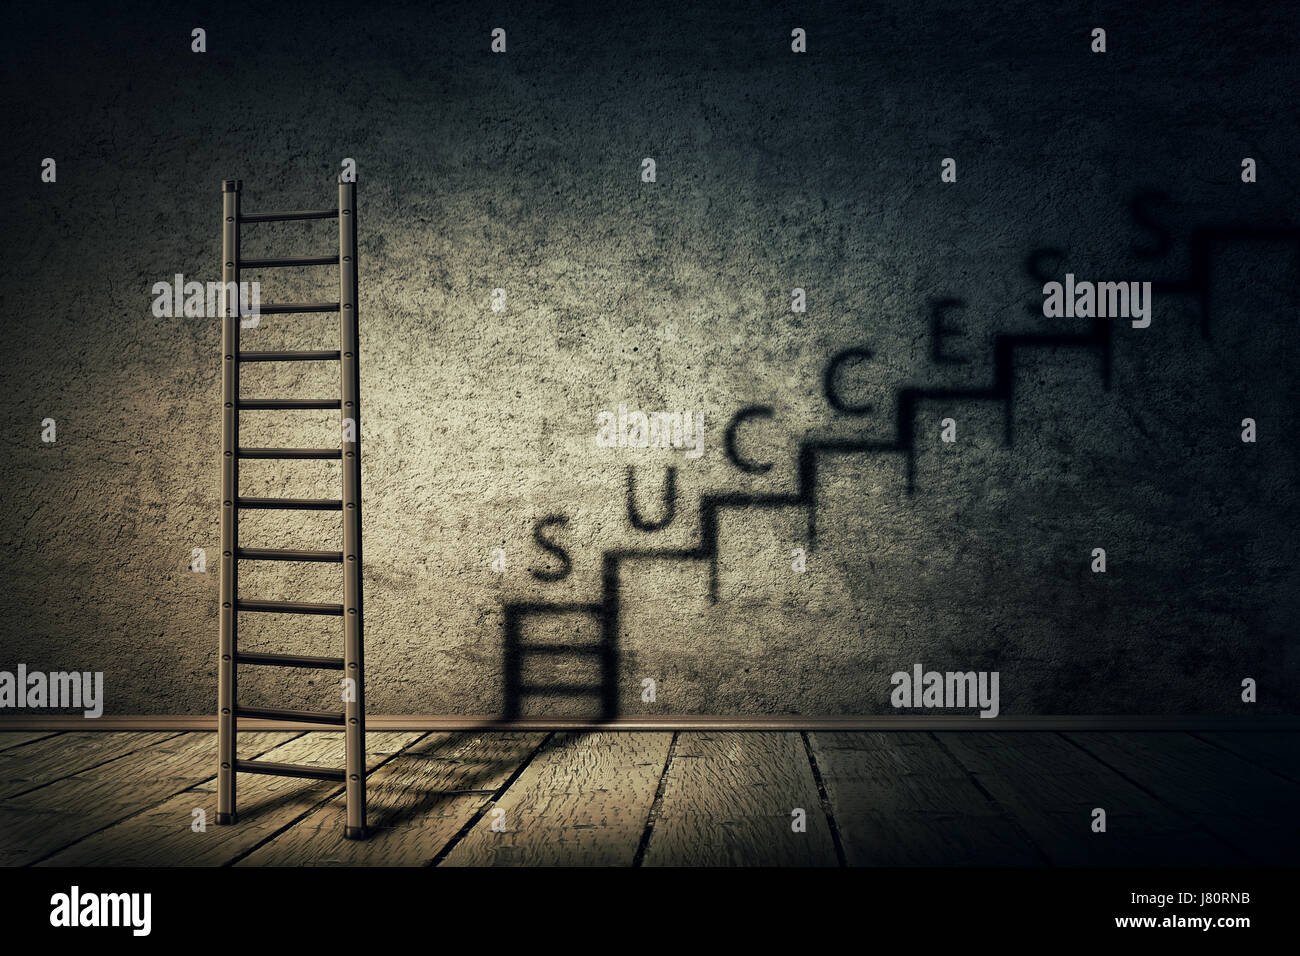 Creative idea concept with ladder in a dark room casting a shadow in a staircase shape as an infinite rise. Business aspirations, ambitions and succes Stock Photo